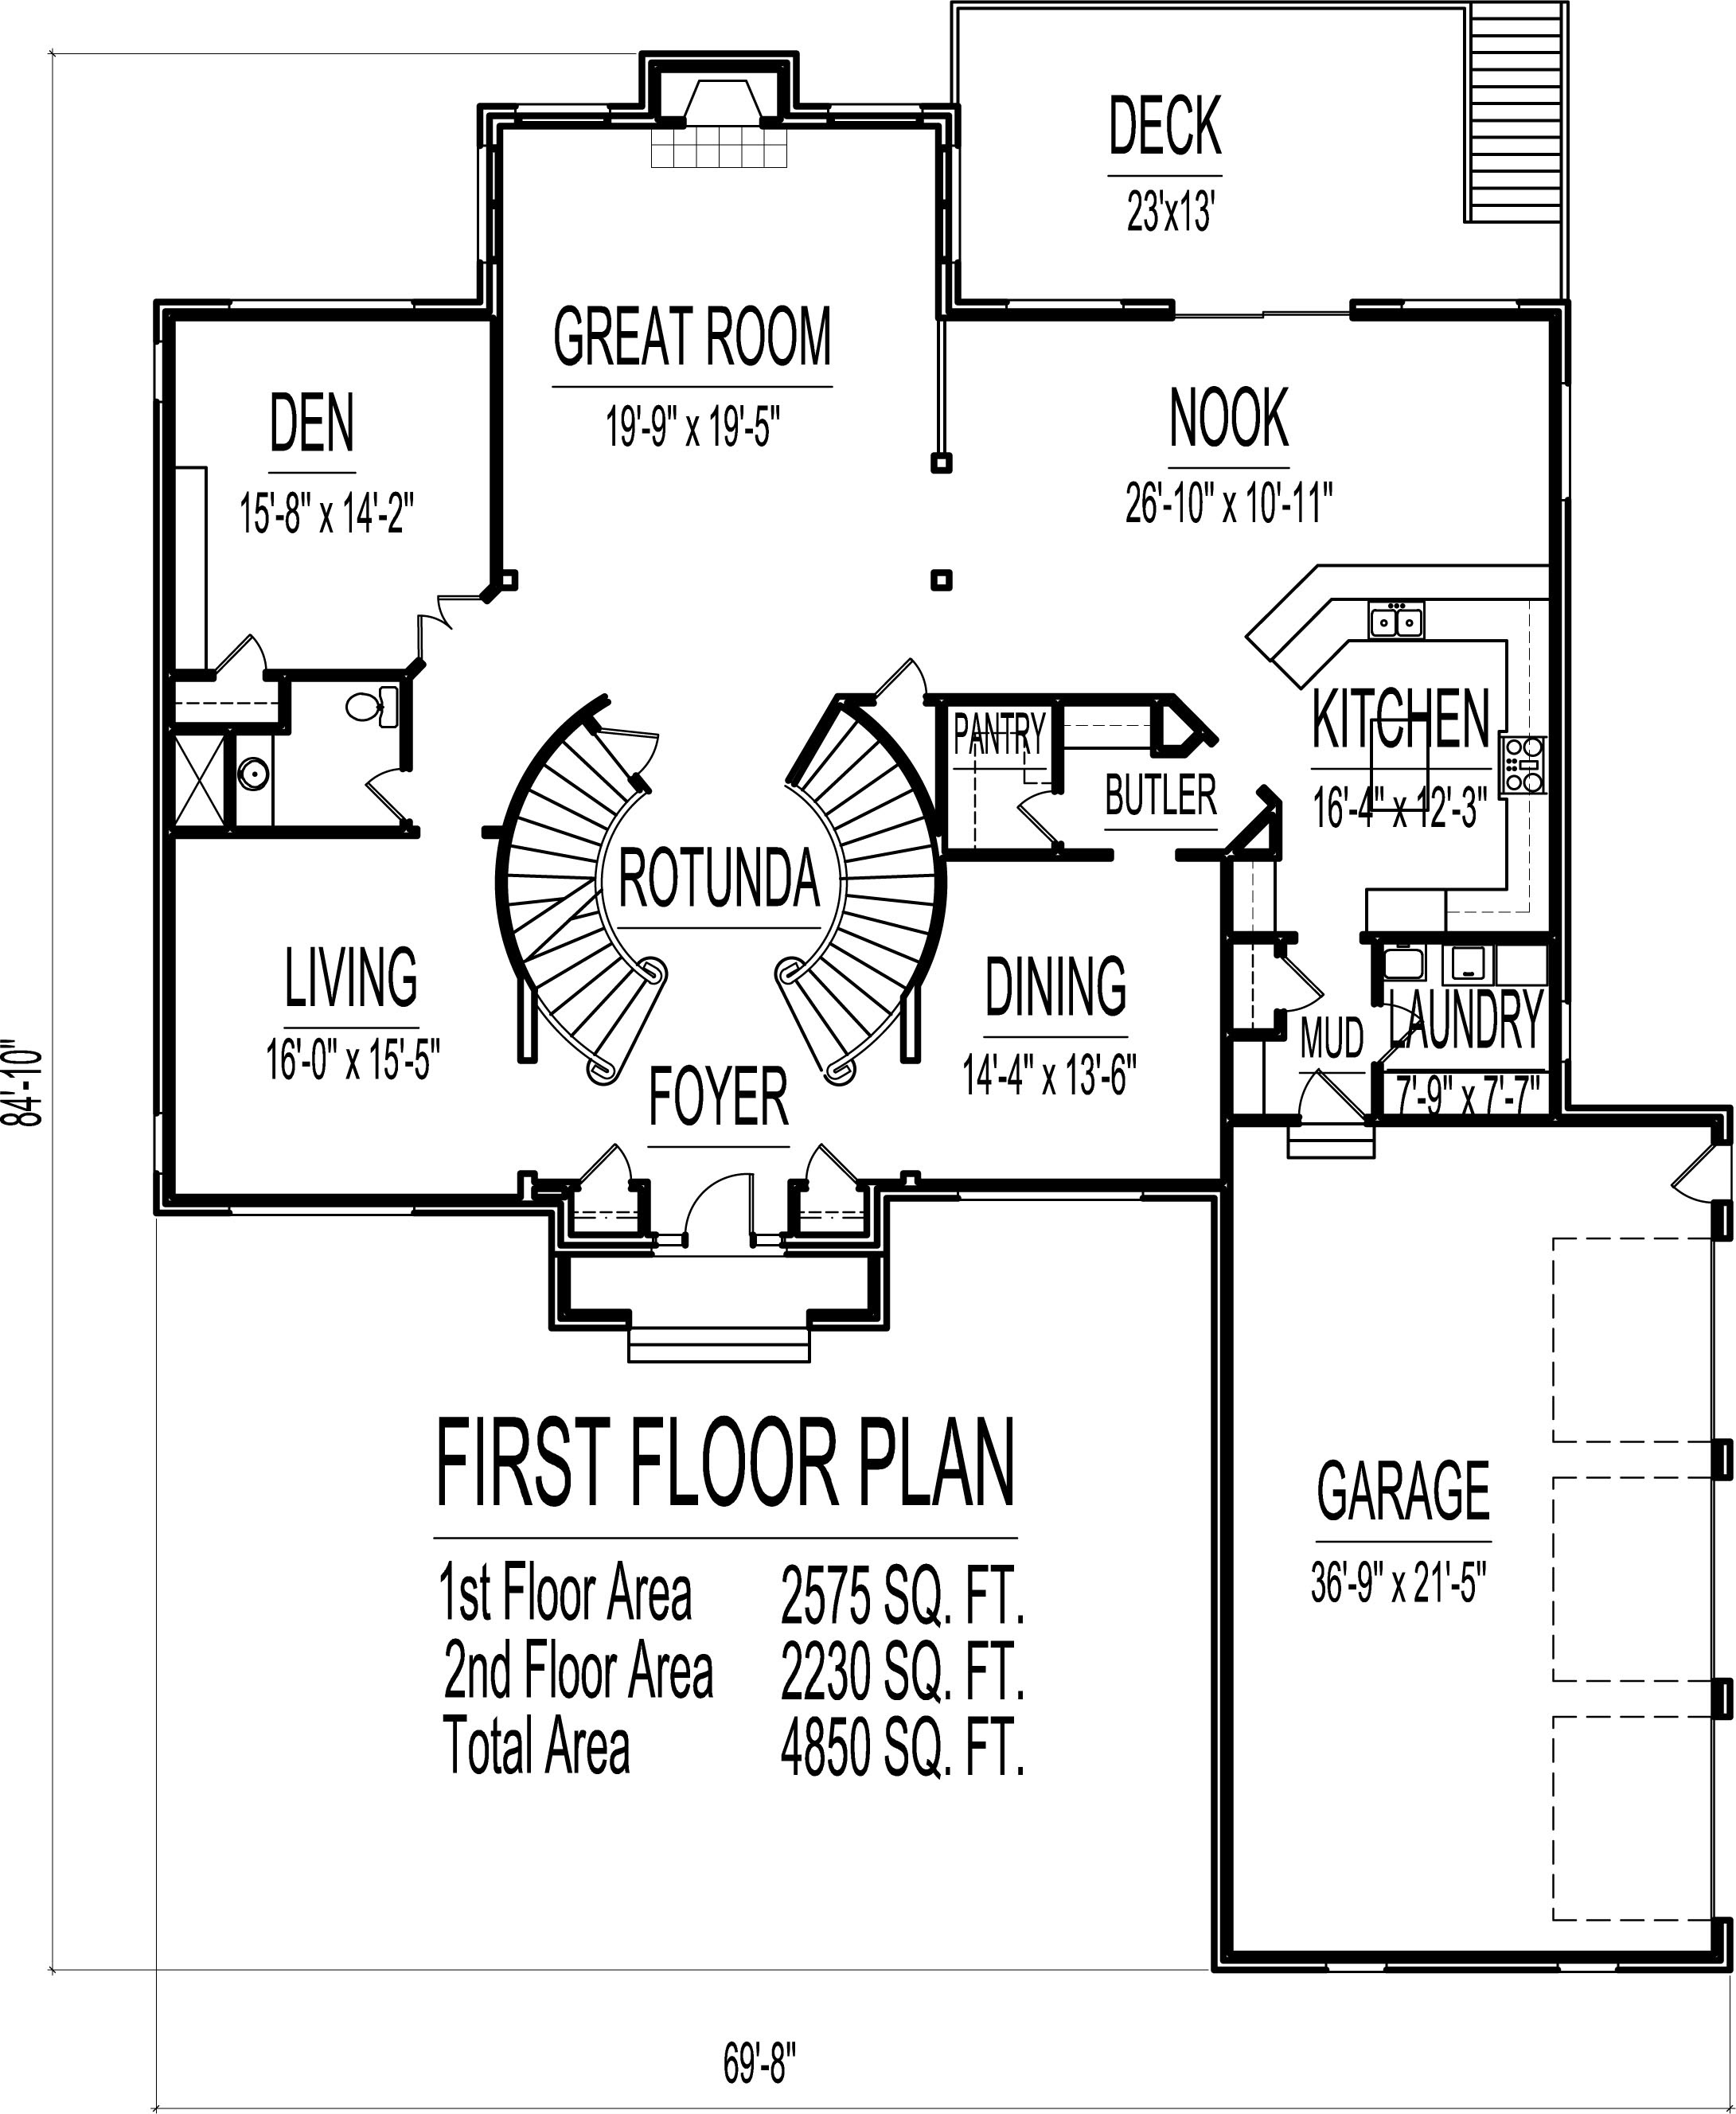 Make my house team are enough capable of designing best small 2 storey house floor plans, two floor home front elevation as per clients requirement, architecture feasibility and variety of features. 4500 Square Foot House Floor Plans 5 Bedroom 2 Story Double Stairs